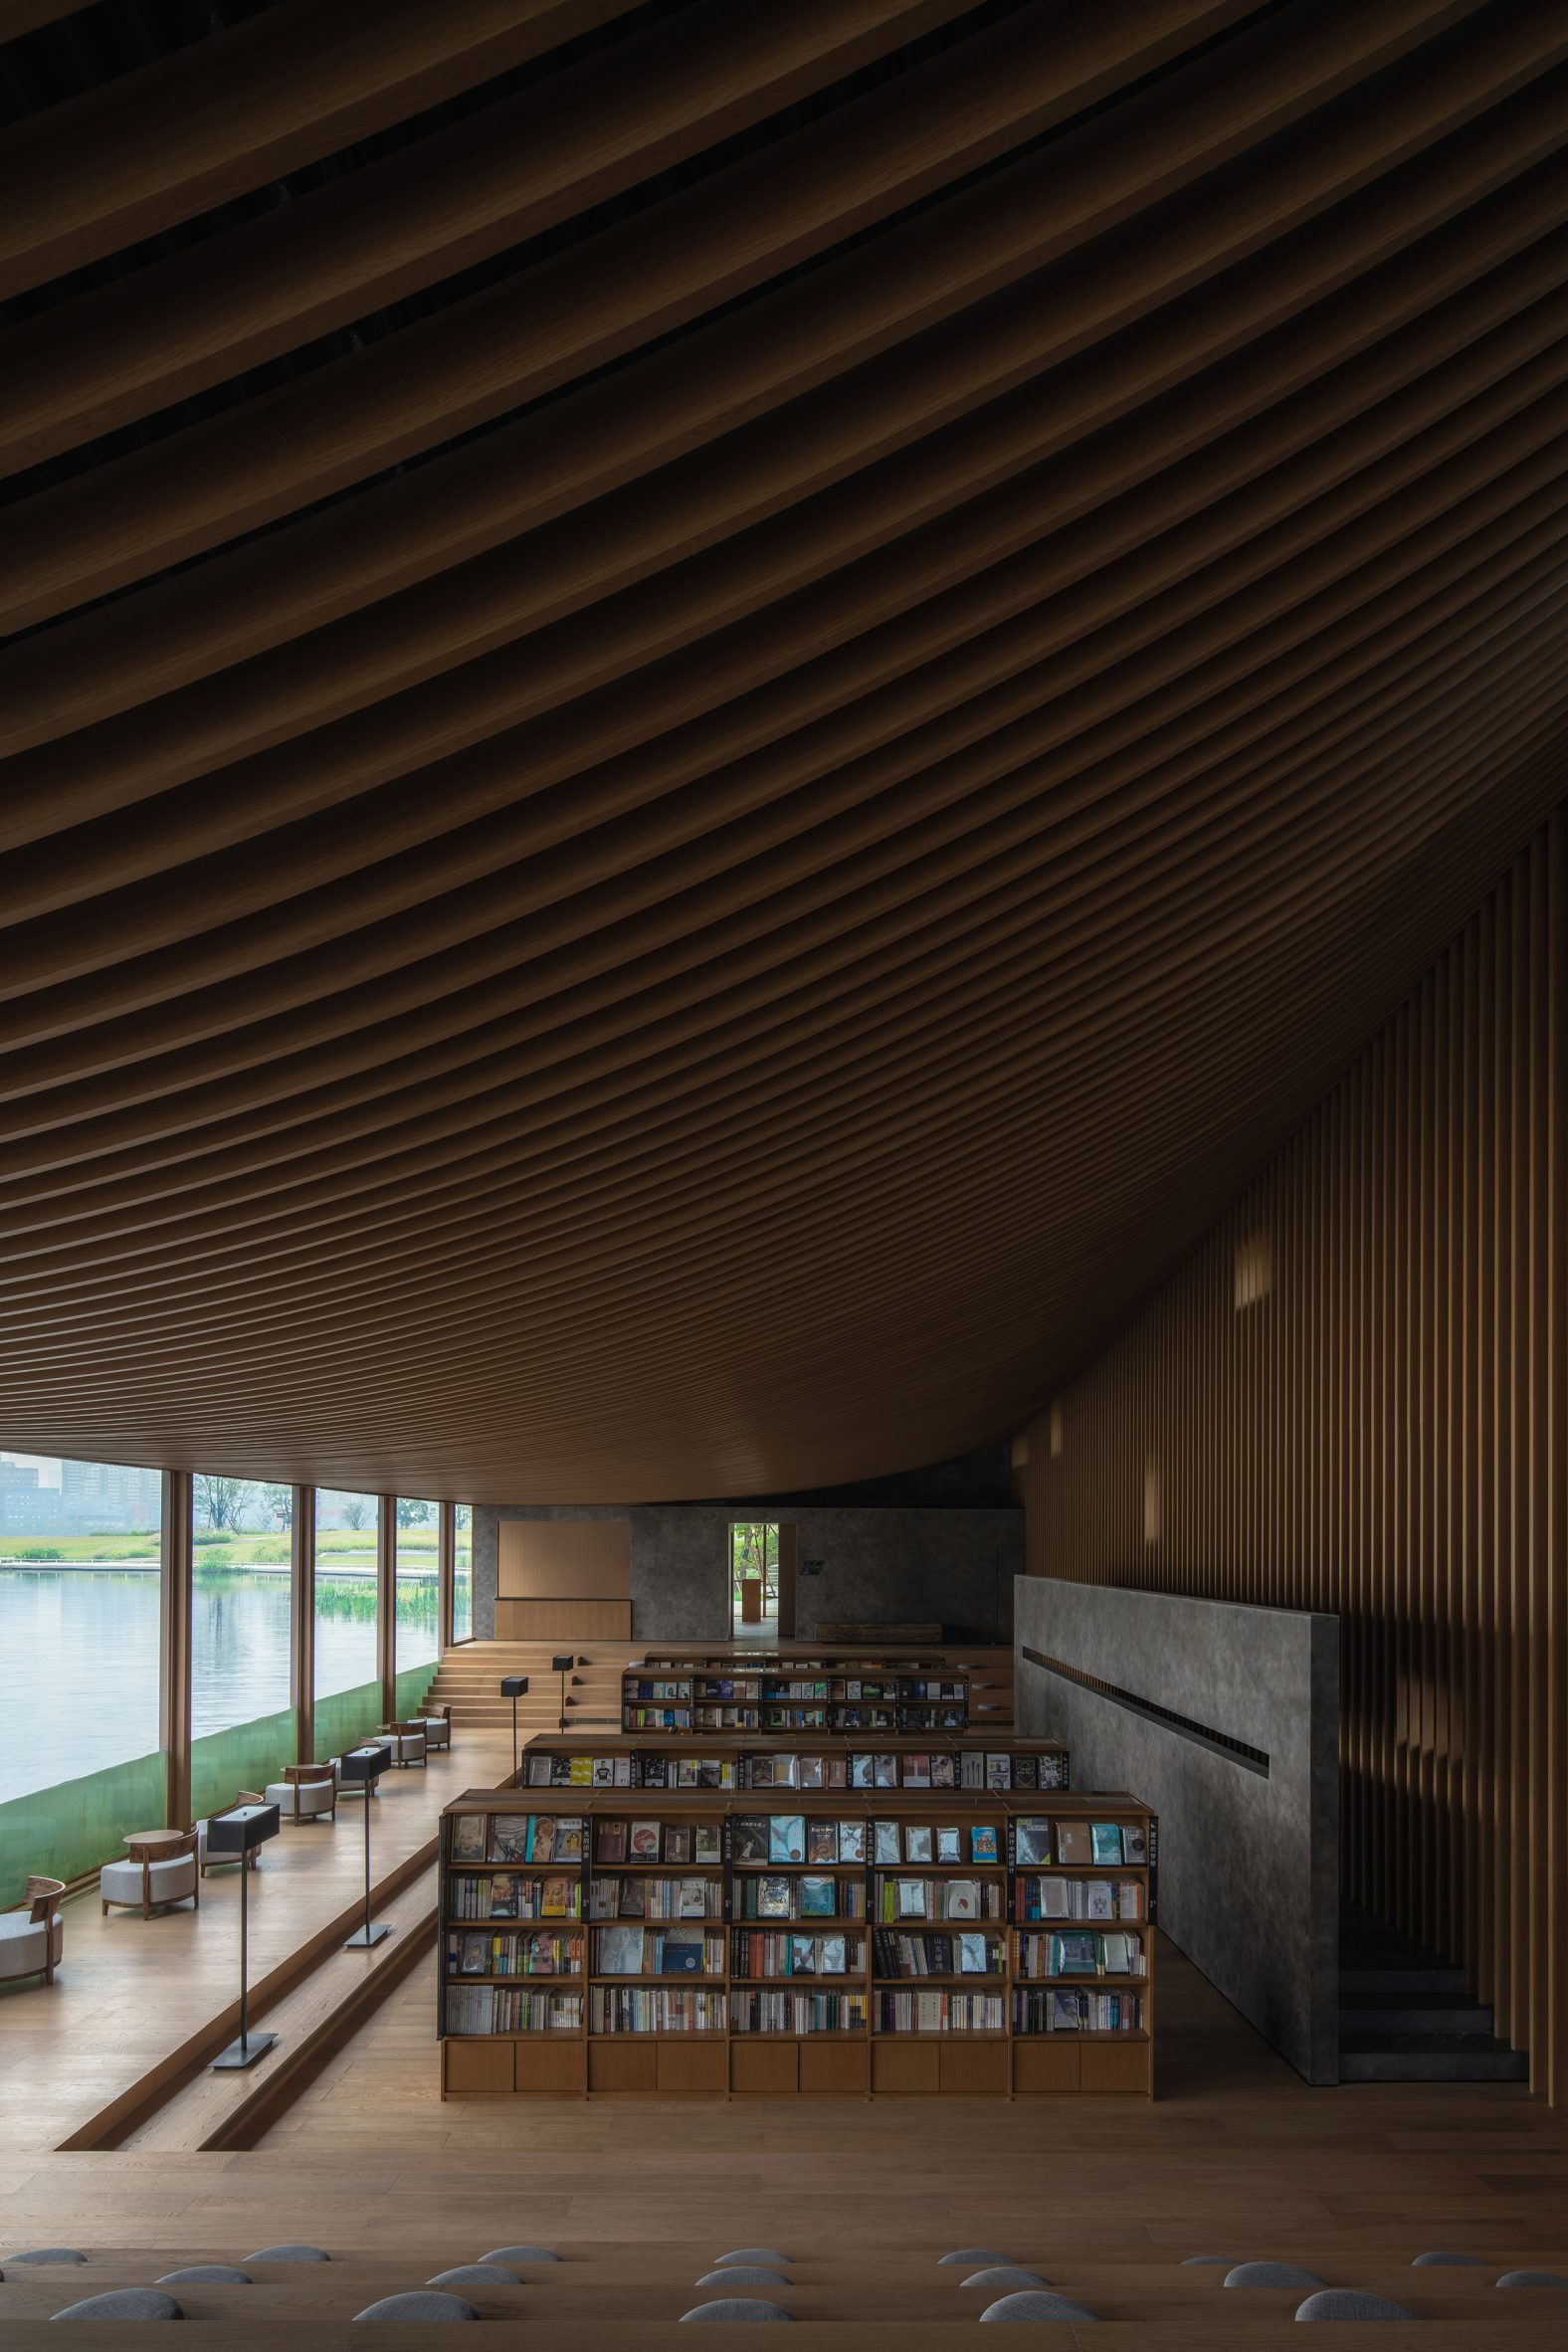 Interior image of the Xinglong Lake Citic Bookstore